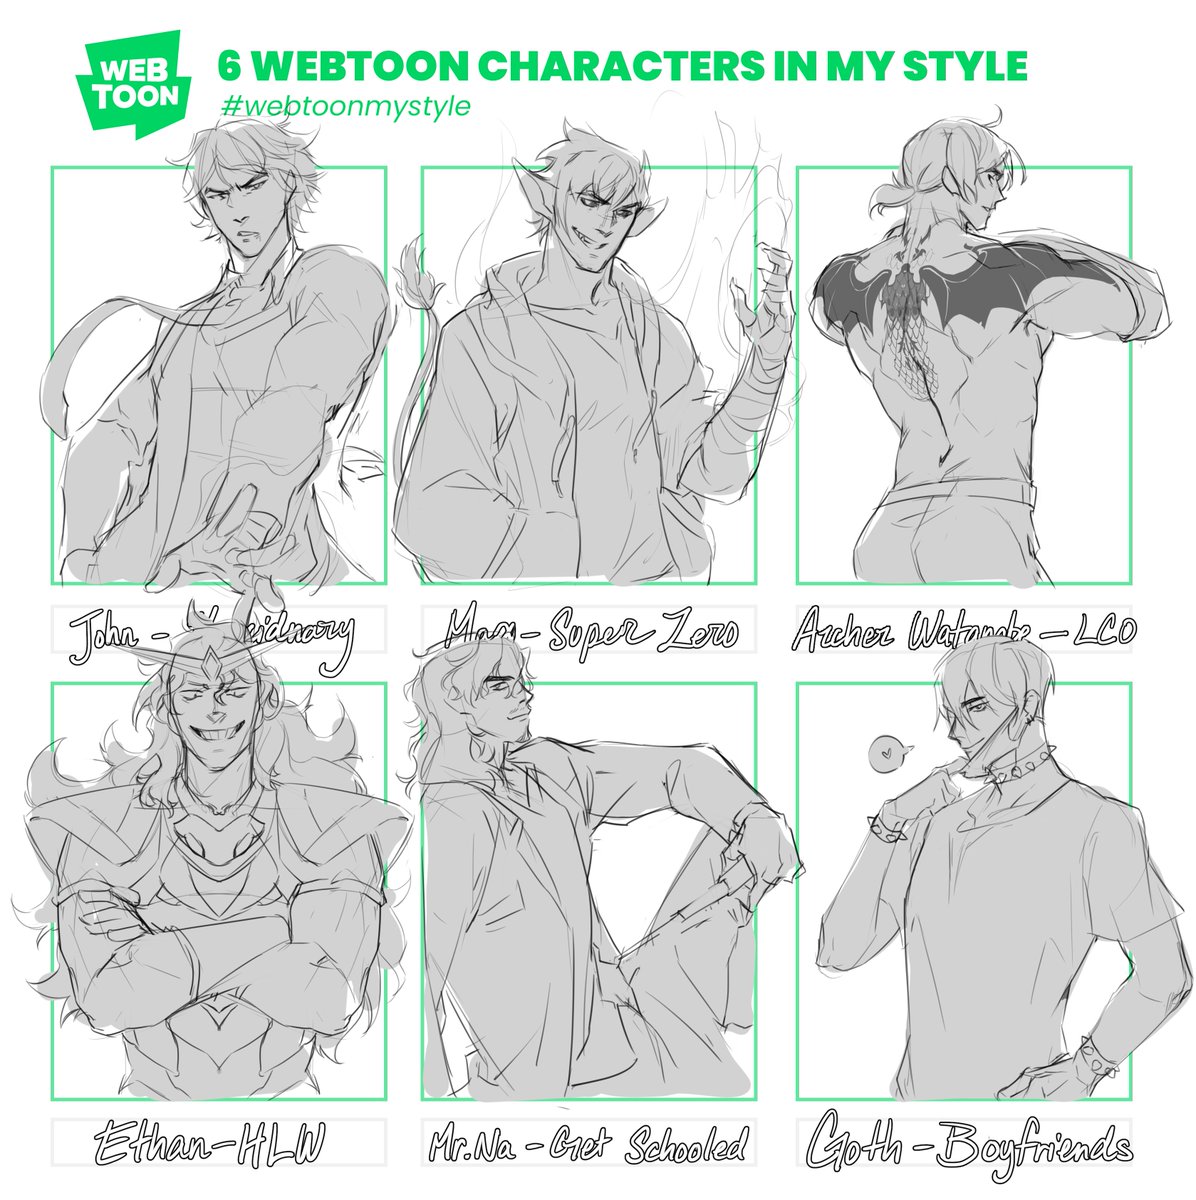 only after i finished the rough sketch did i realize i very much have a type

#WEBTOONMyStyle 